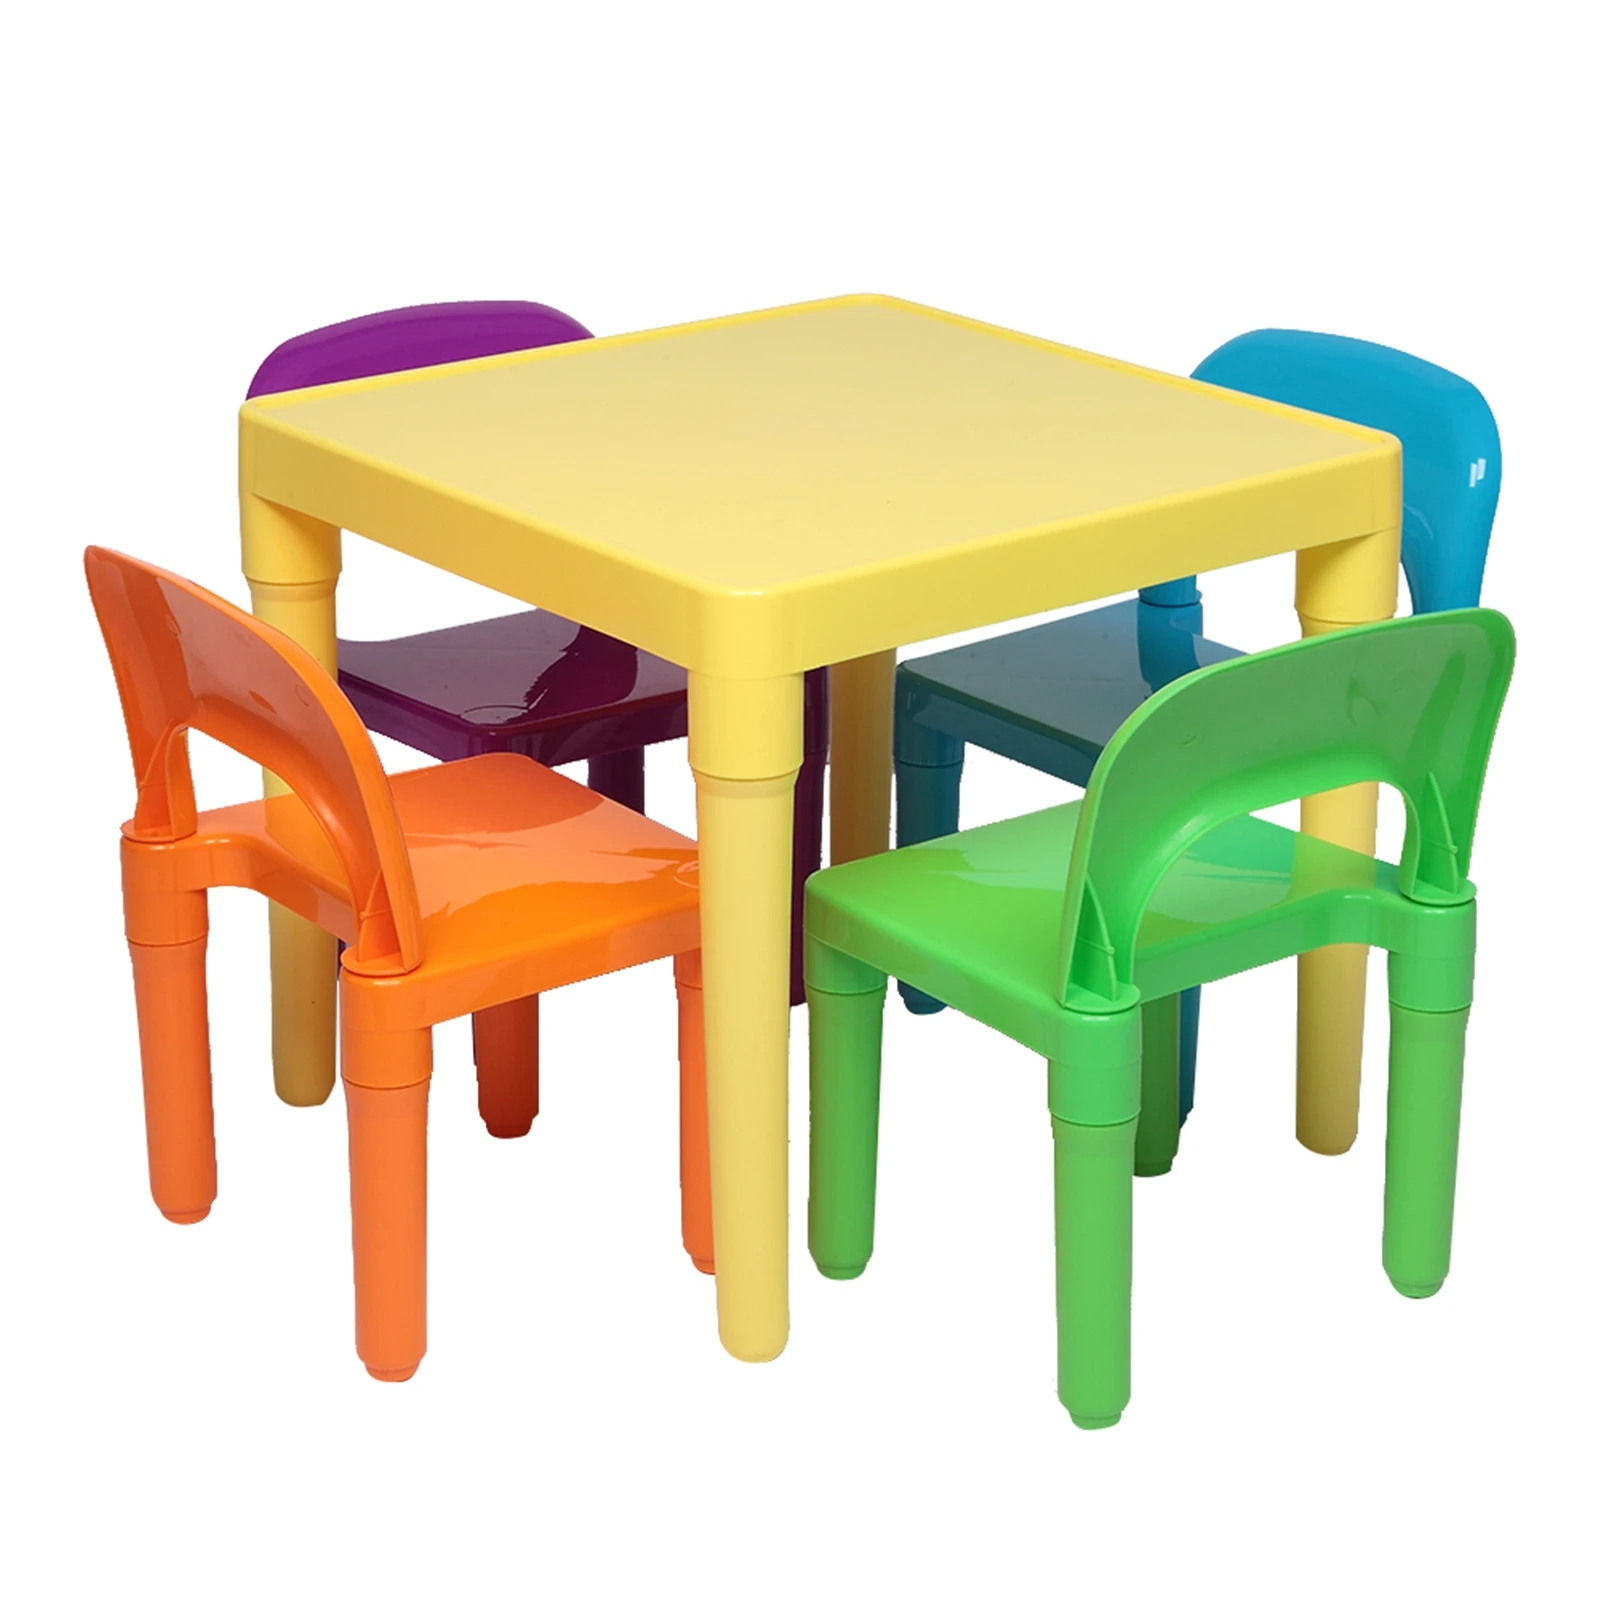 Kids Plastic Table Chair Set Colorful 1 Desk 4 Chairs Children Learning Writing Study Play Games Home Kindergarden School Yellow